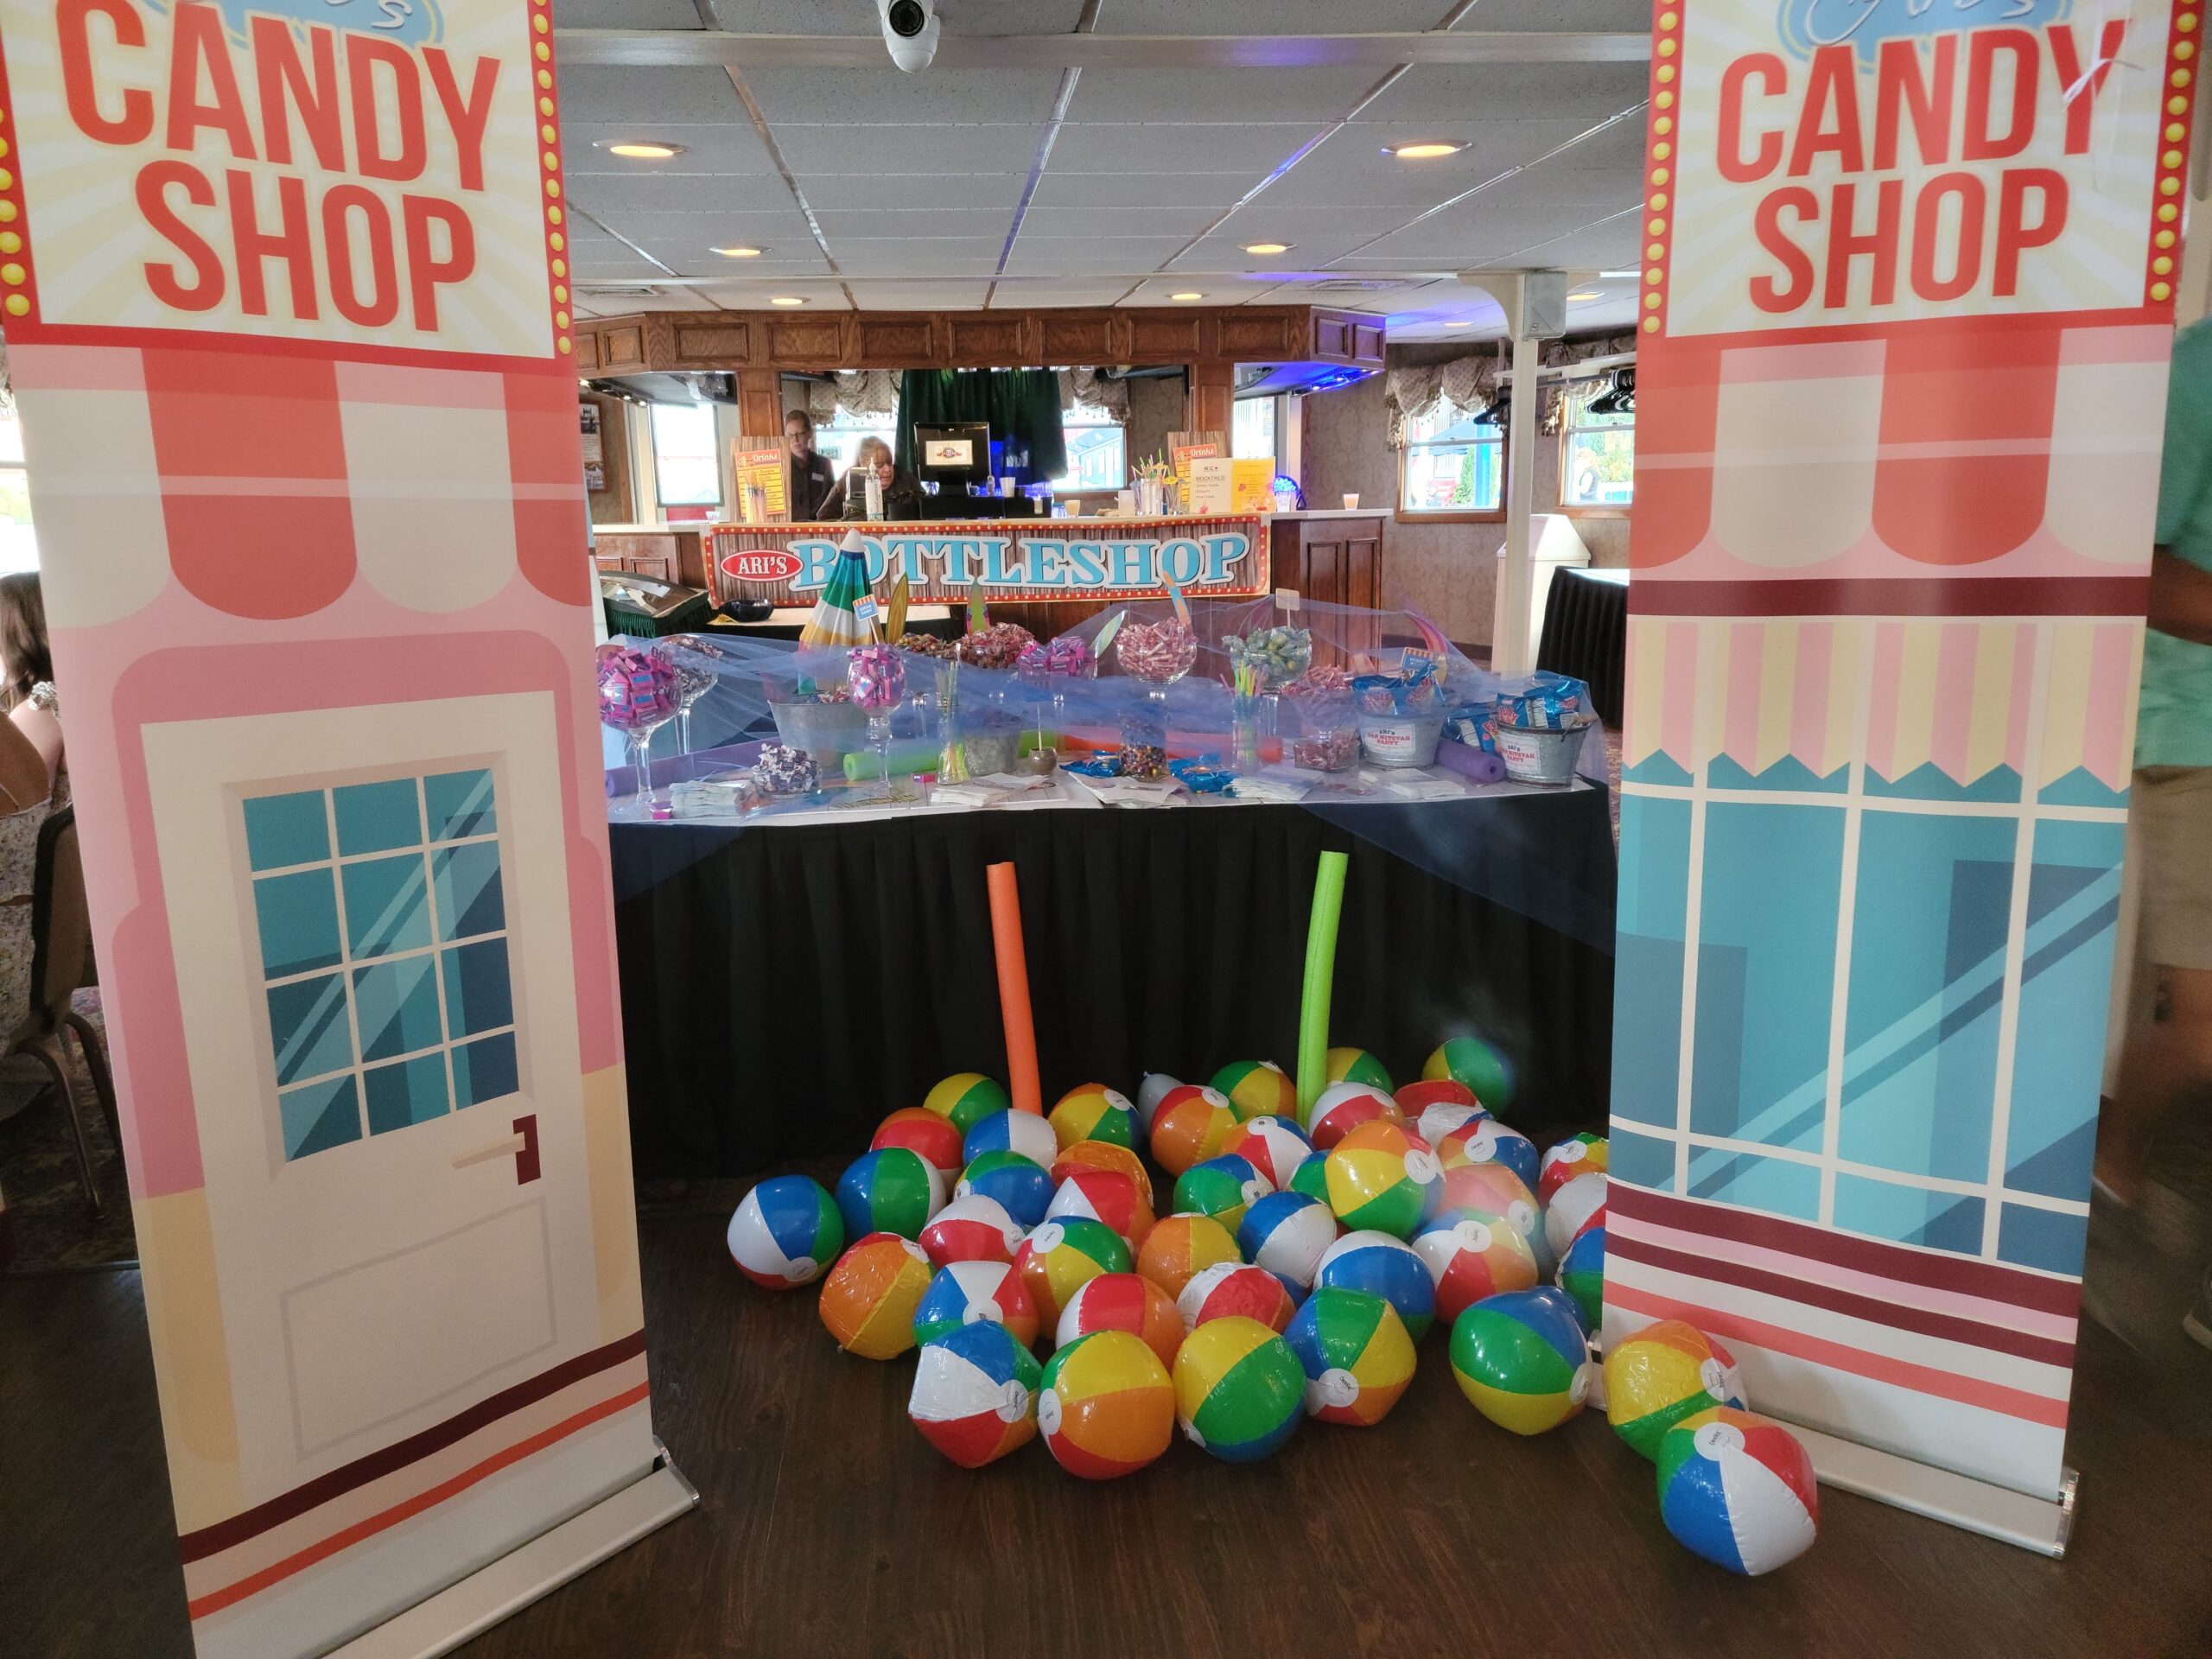 a candy shop display with lots of balls on the floor